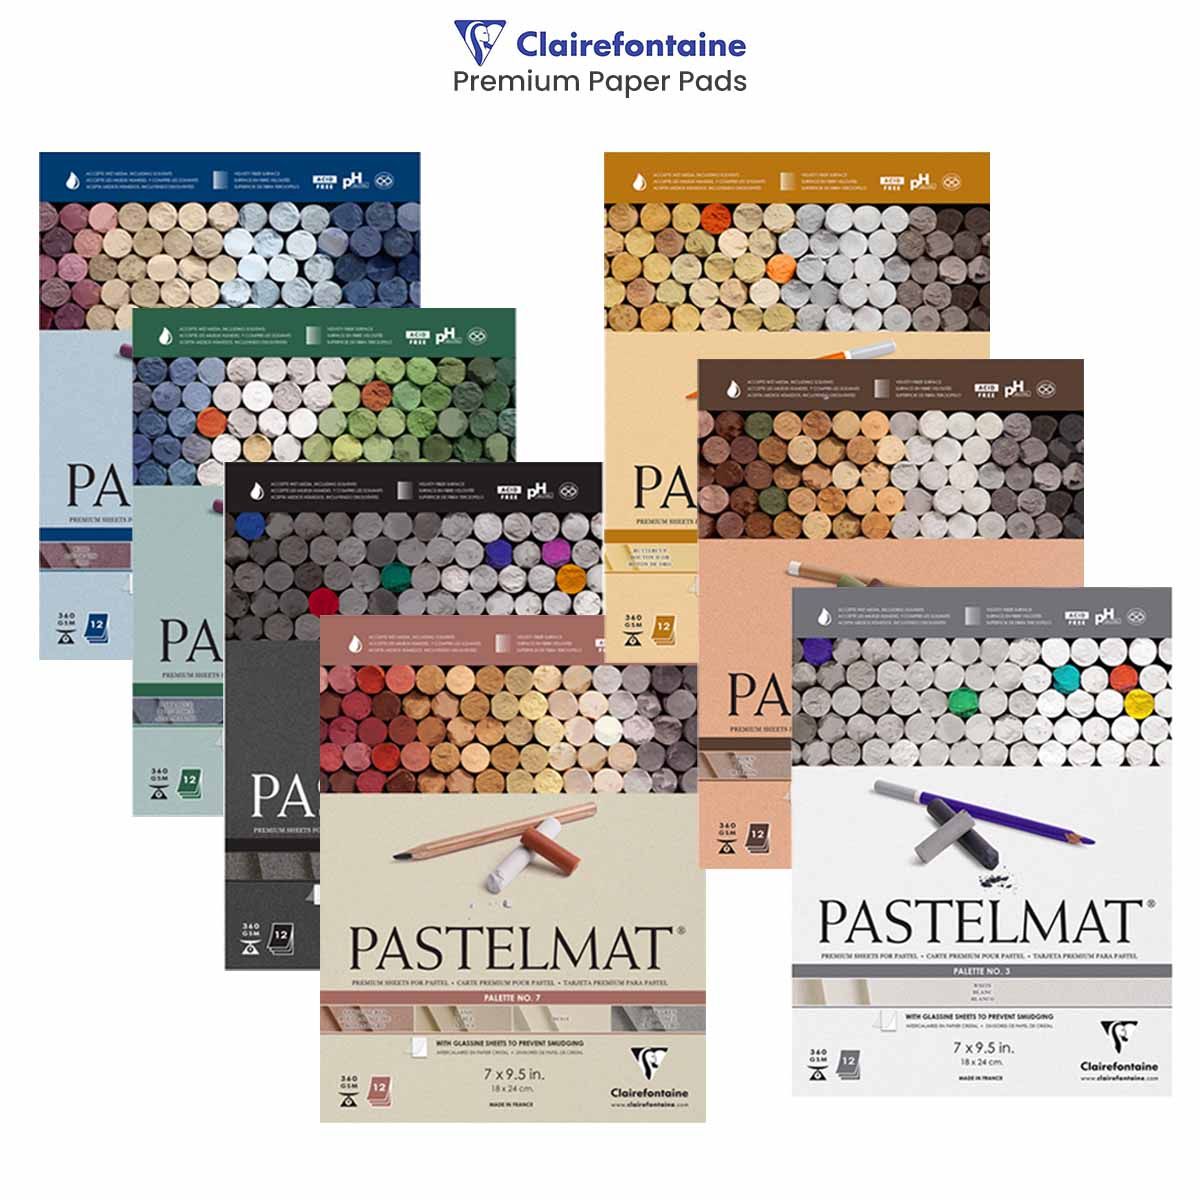 Packs of Clairefontaine Pastelmat